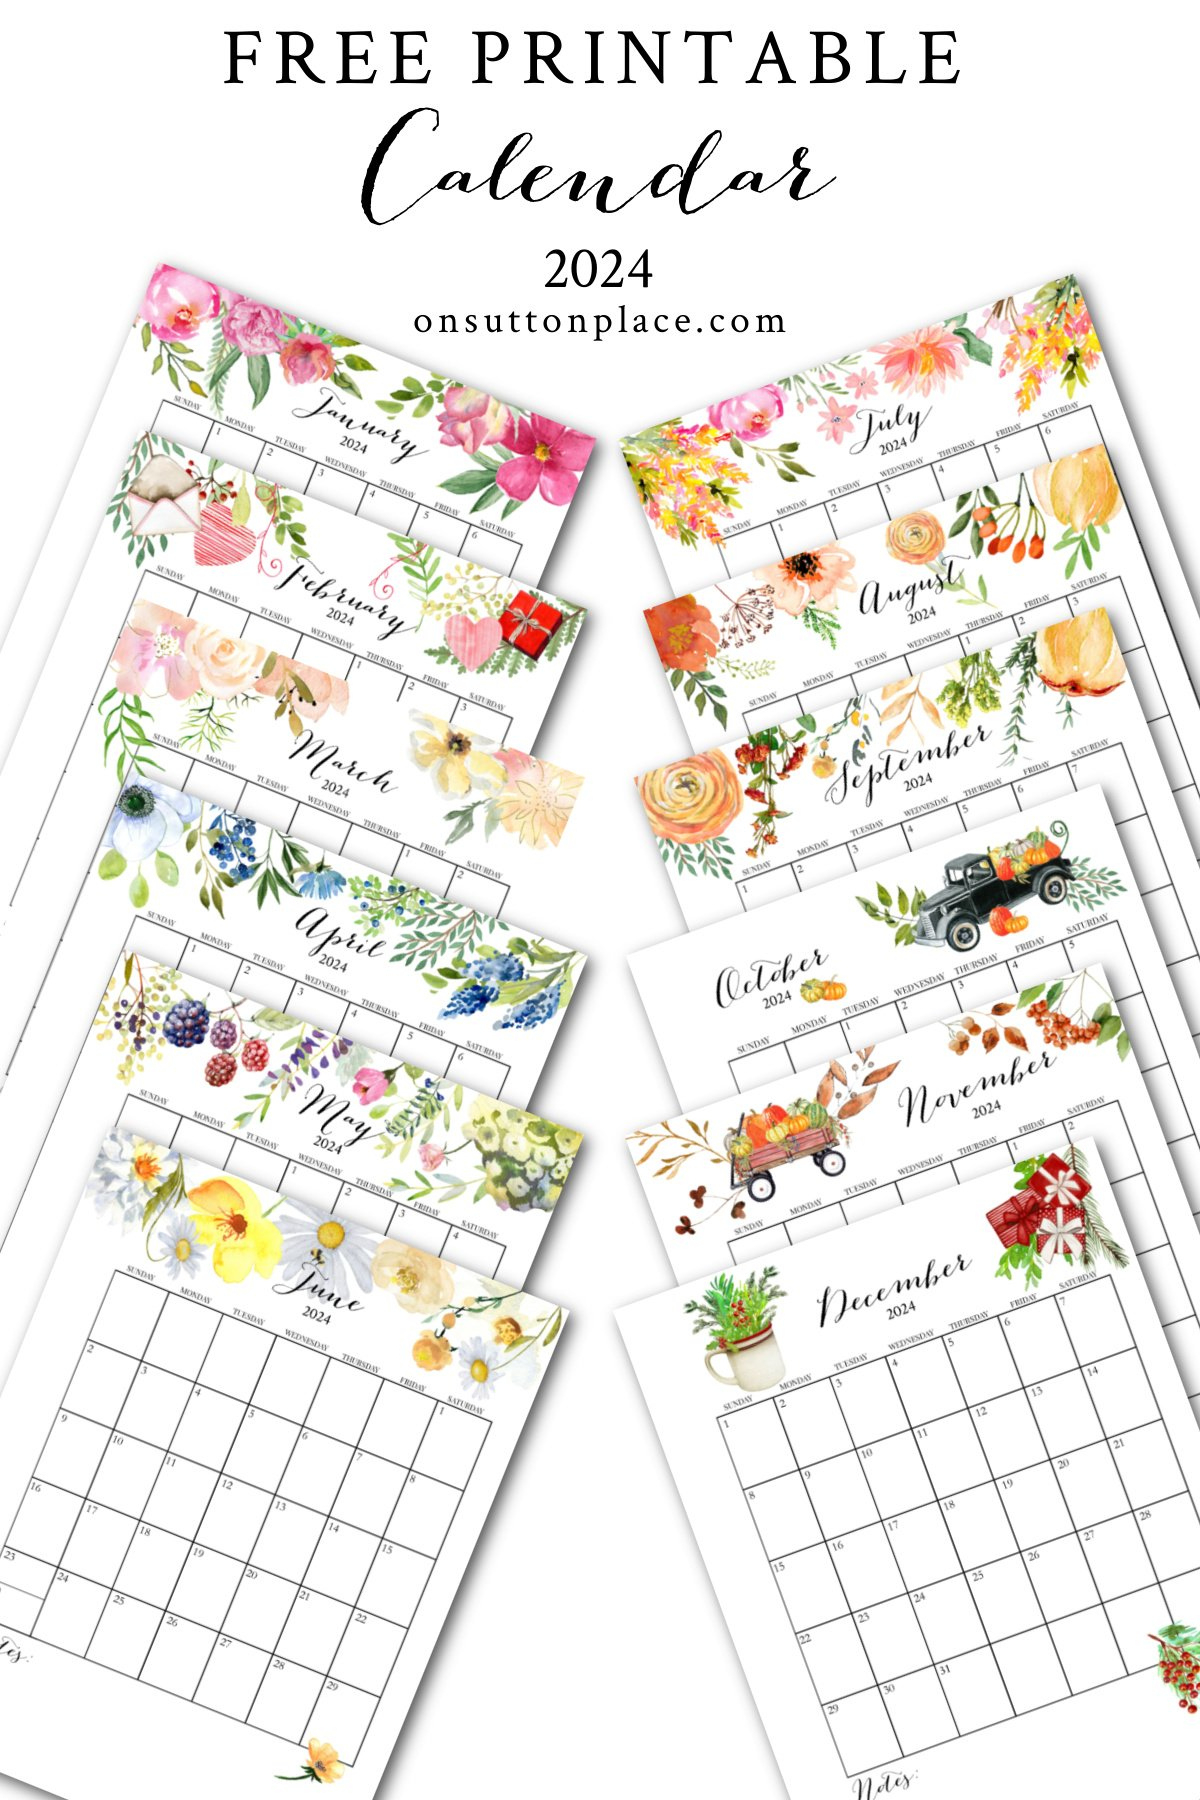 2024 Free Printable Calendar With Planner Pages - On Sutton Place | Printable Calendar 2024 Monthly Planner